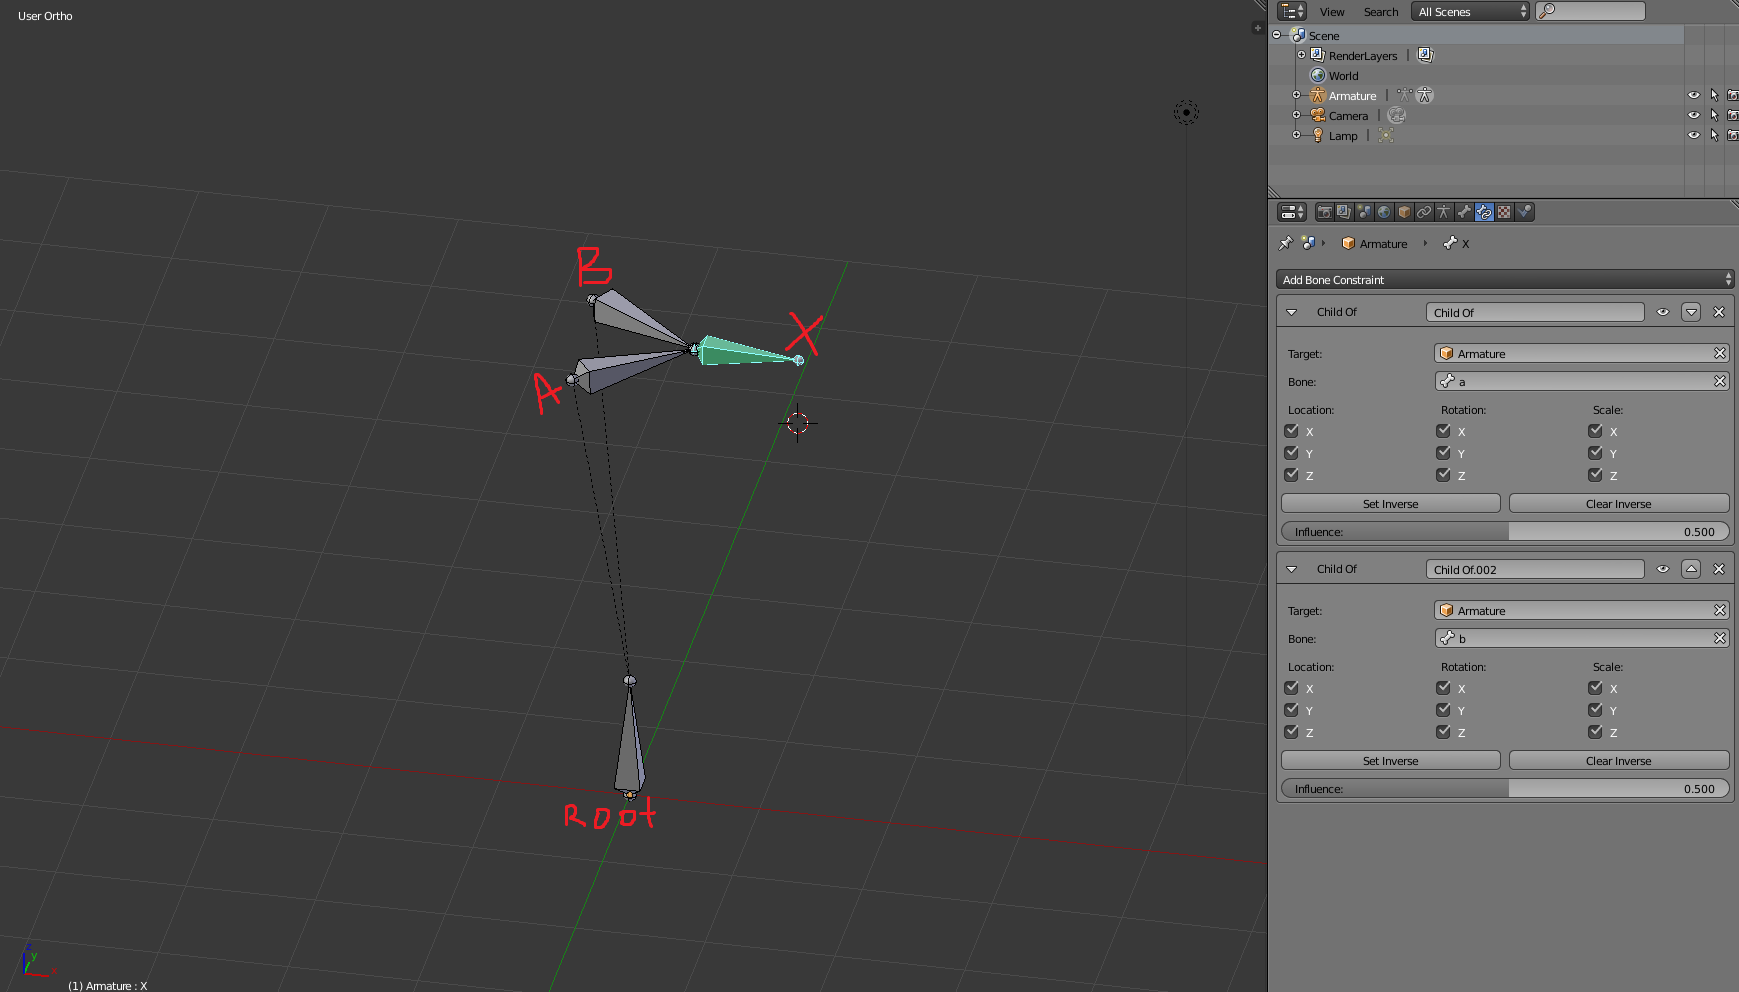 Some trouble with "Child Of" constraint Animation and Rigging - Blender Artists Community